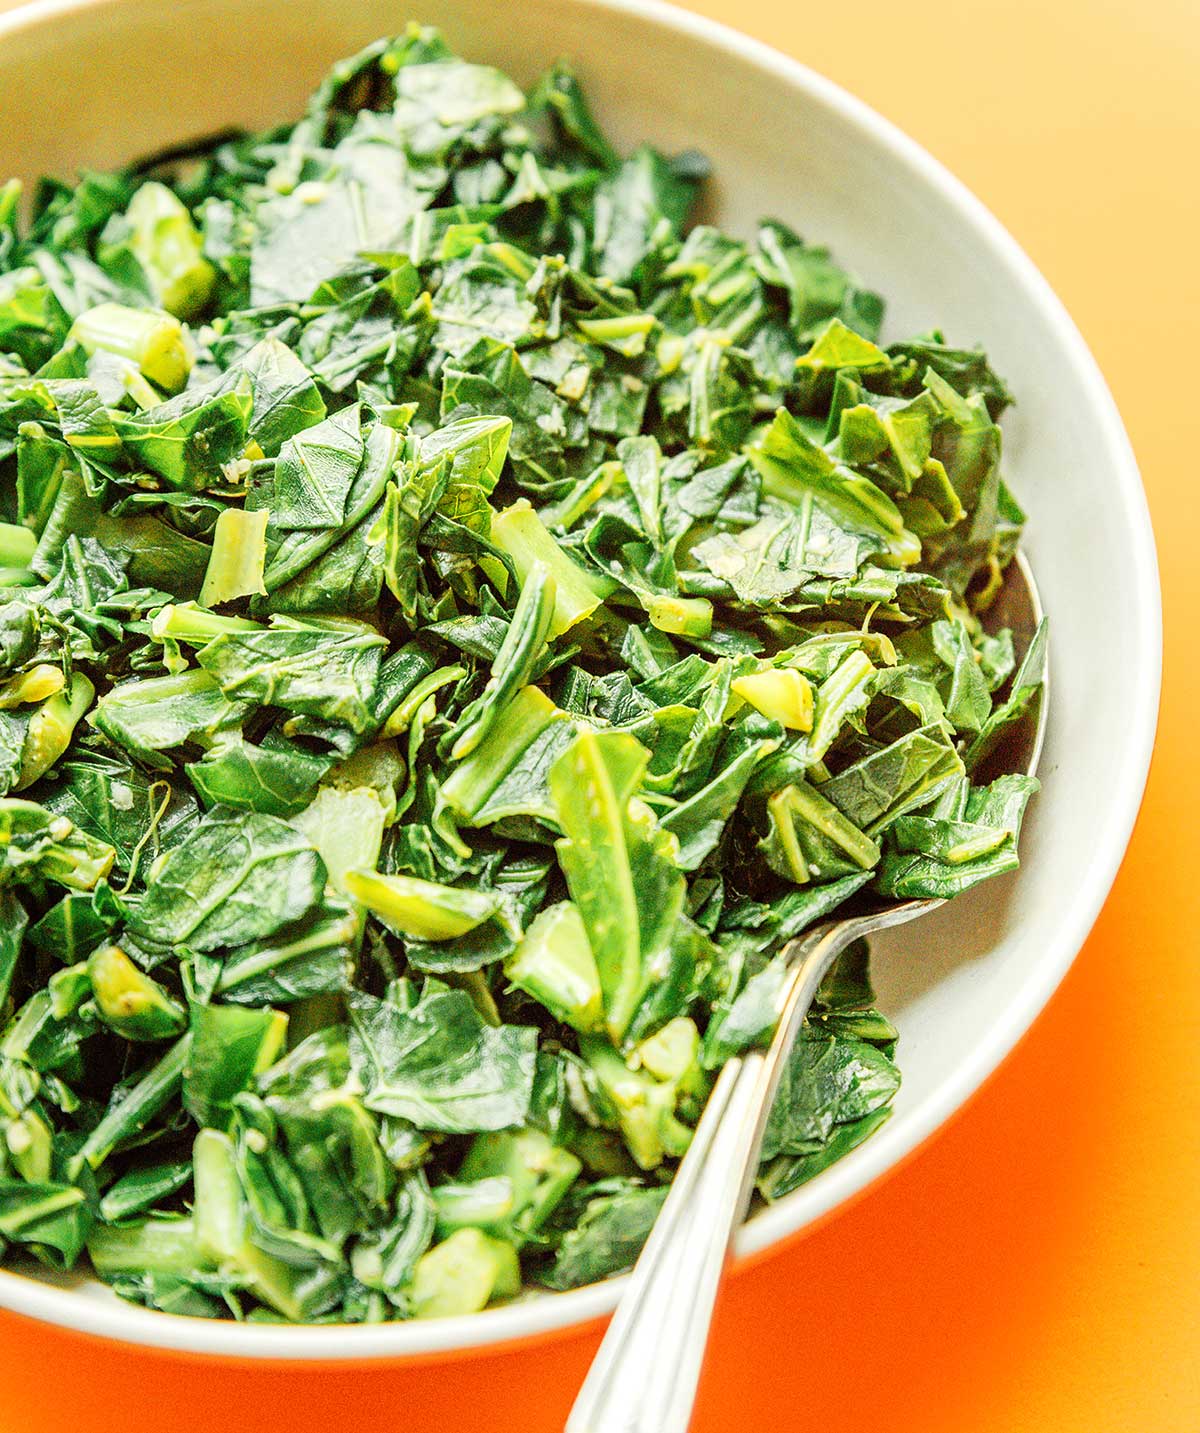 A white bowl filled with chopped and sautéed collard greens